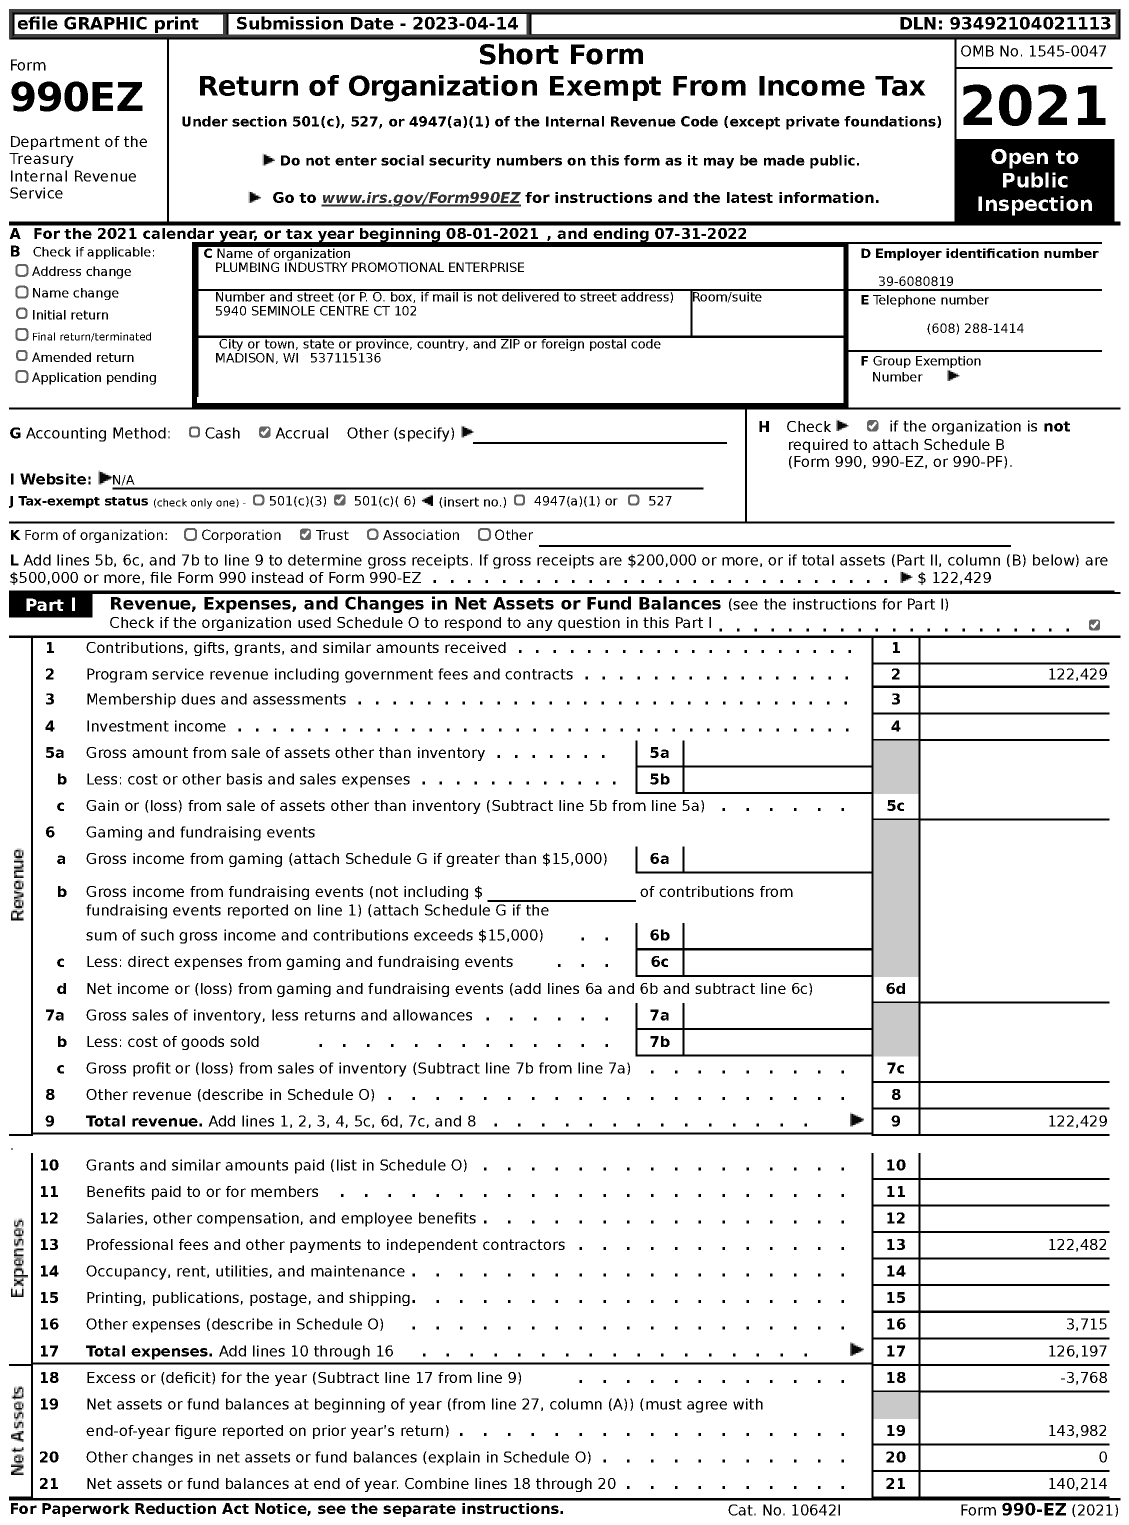 Image of first page of 2021 Form 990EZ for Plumbing Industry Promotional Enterprise